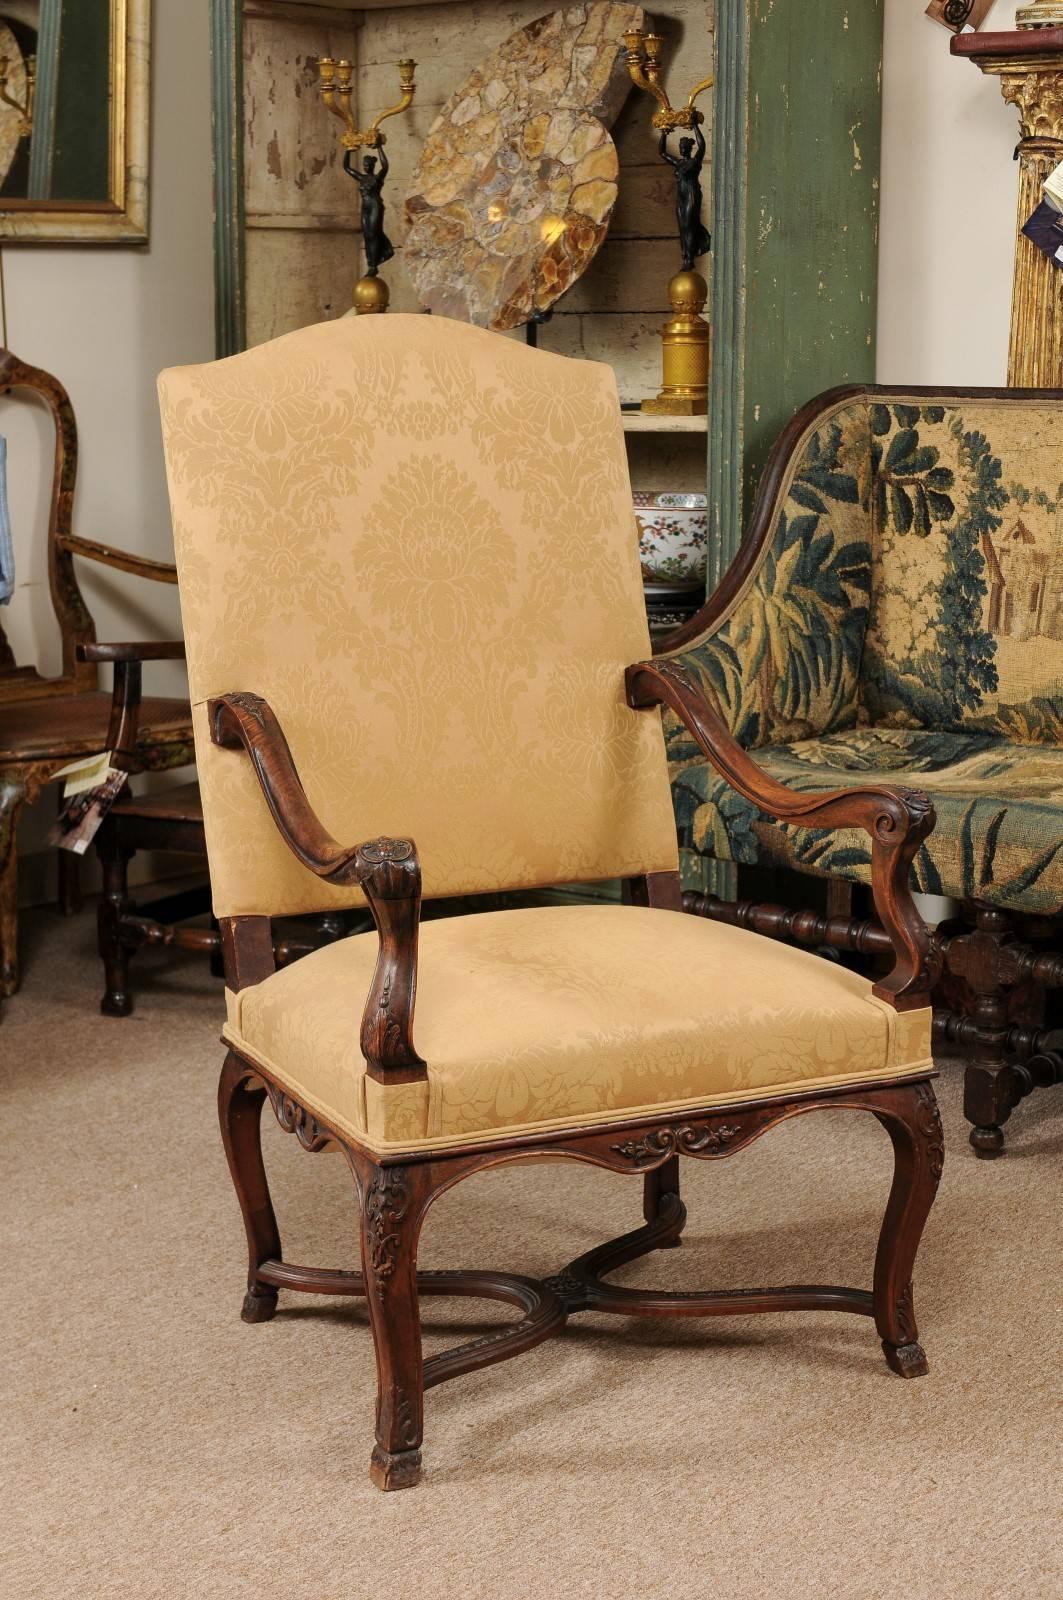 18th century French Regence period walnut fauteuil / open arm chair.